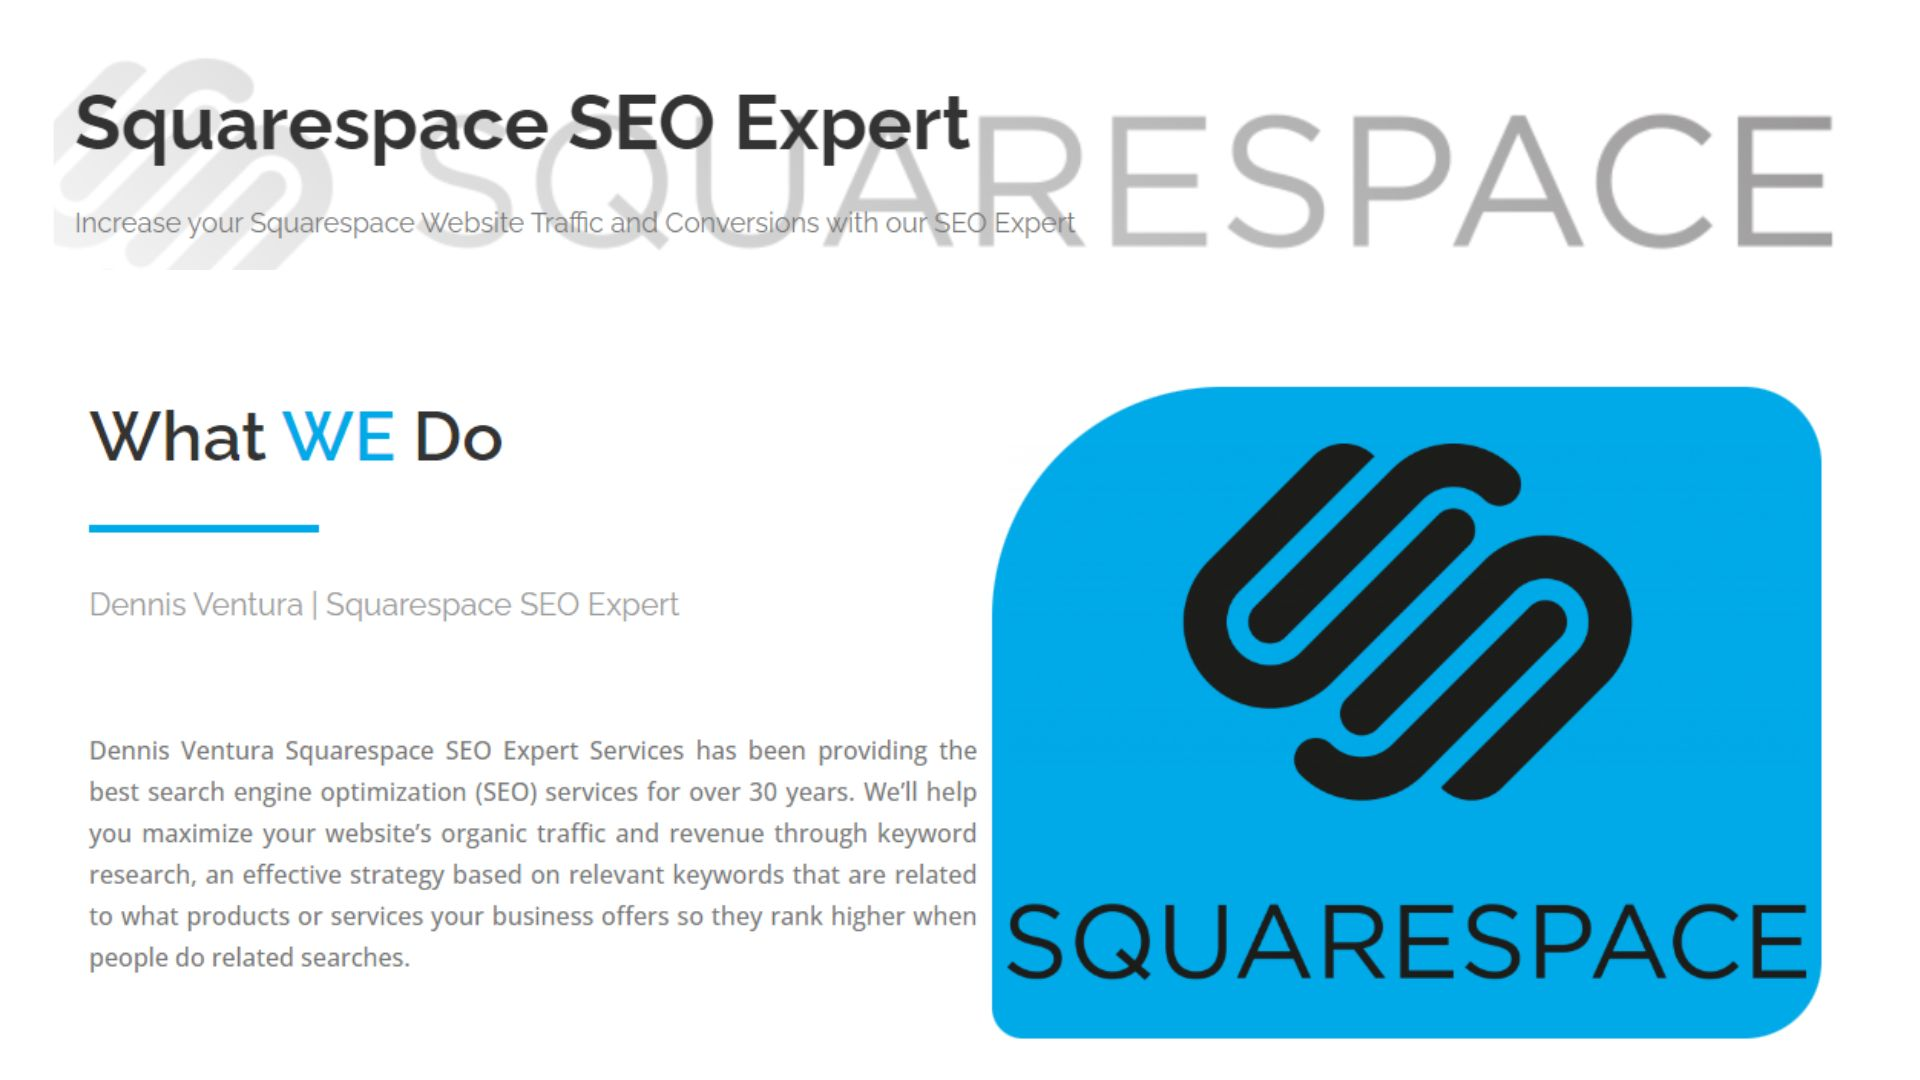 What Makes An Effective Squarespace SEO Expert?